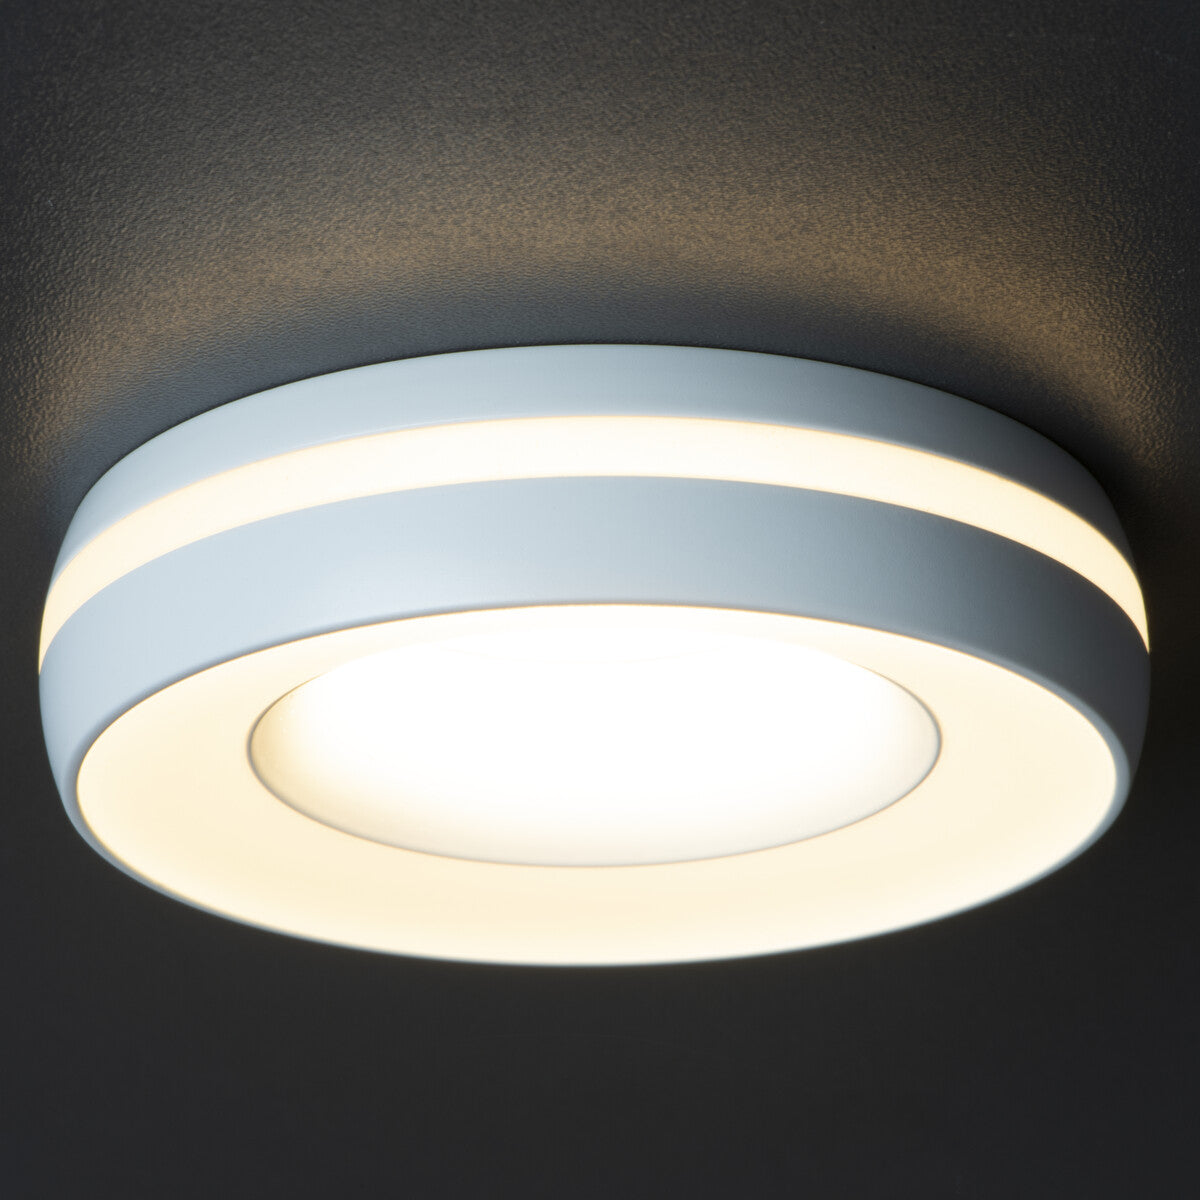 Kanlux ELICEO GU10 Ceiling Recessed Mounted Round Spot Light Fitting